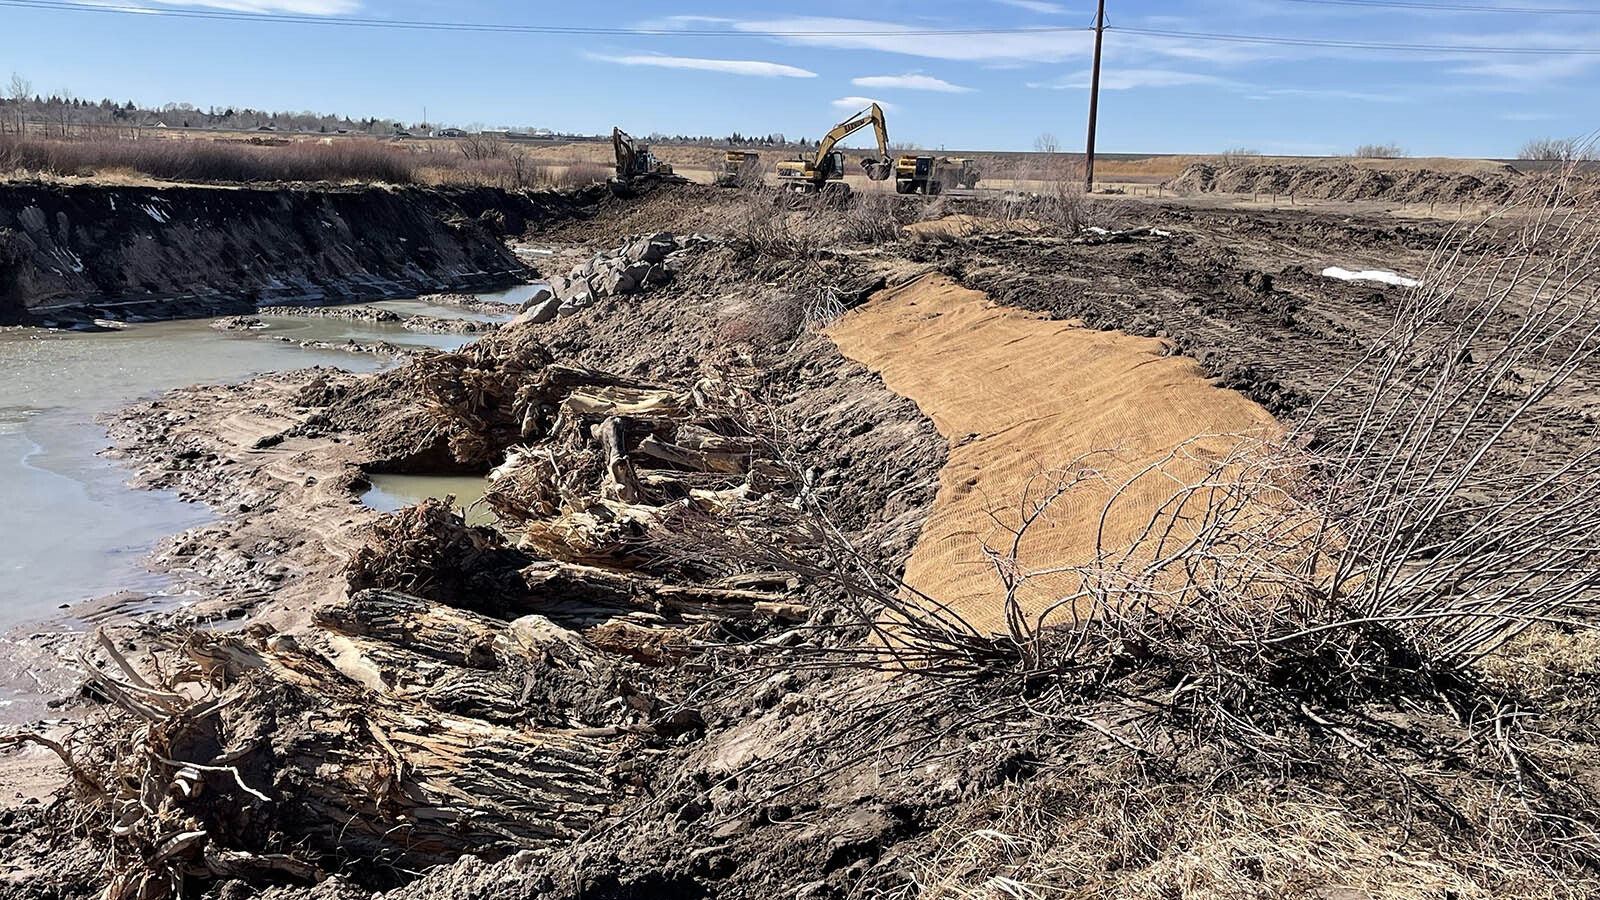 Massive chunks of cottonwood trees were placed in a fishing pond development in the Cheyenne Business Parkway Natural Area. Once the water fills in, the “toe wood,” as designers call it, will provide shelter for fish.